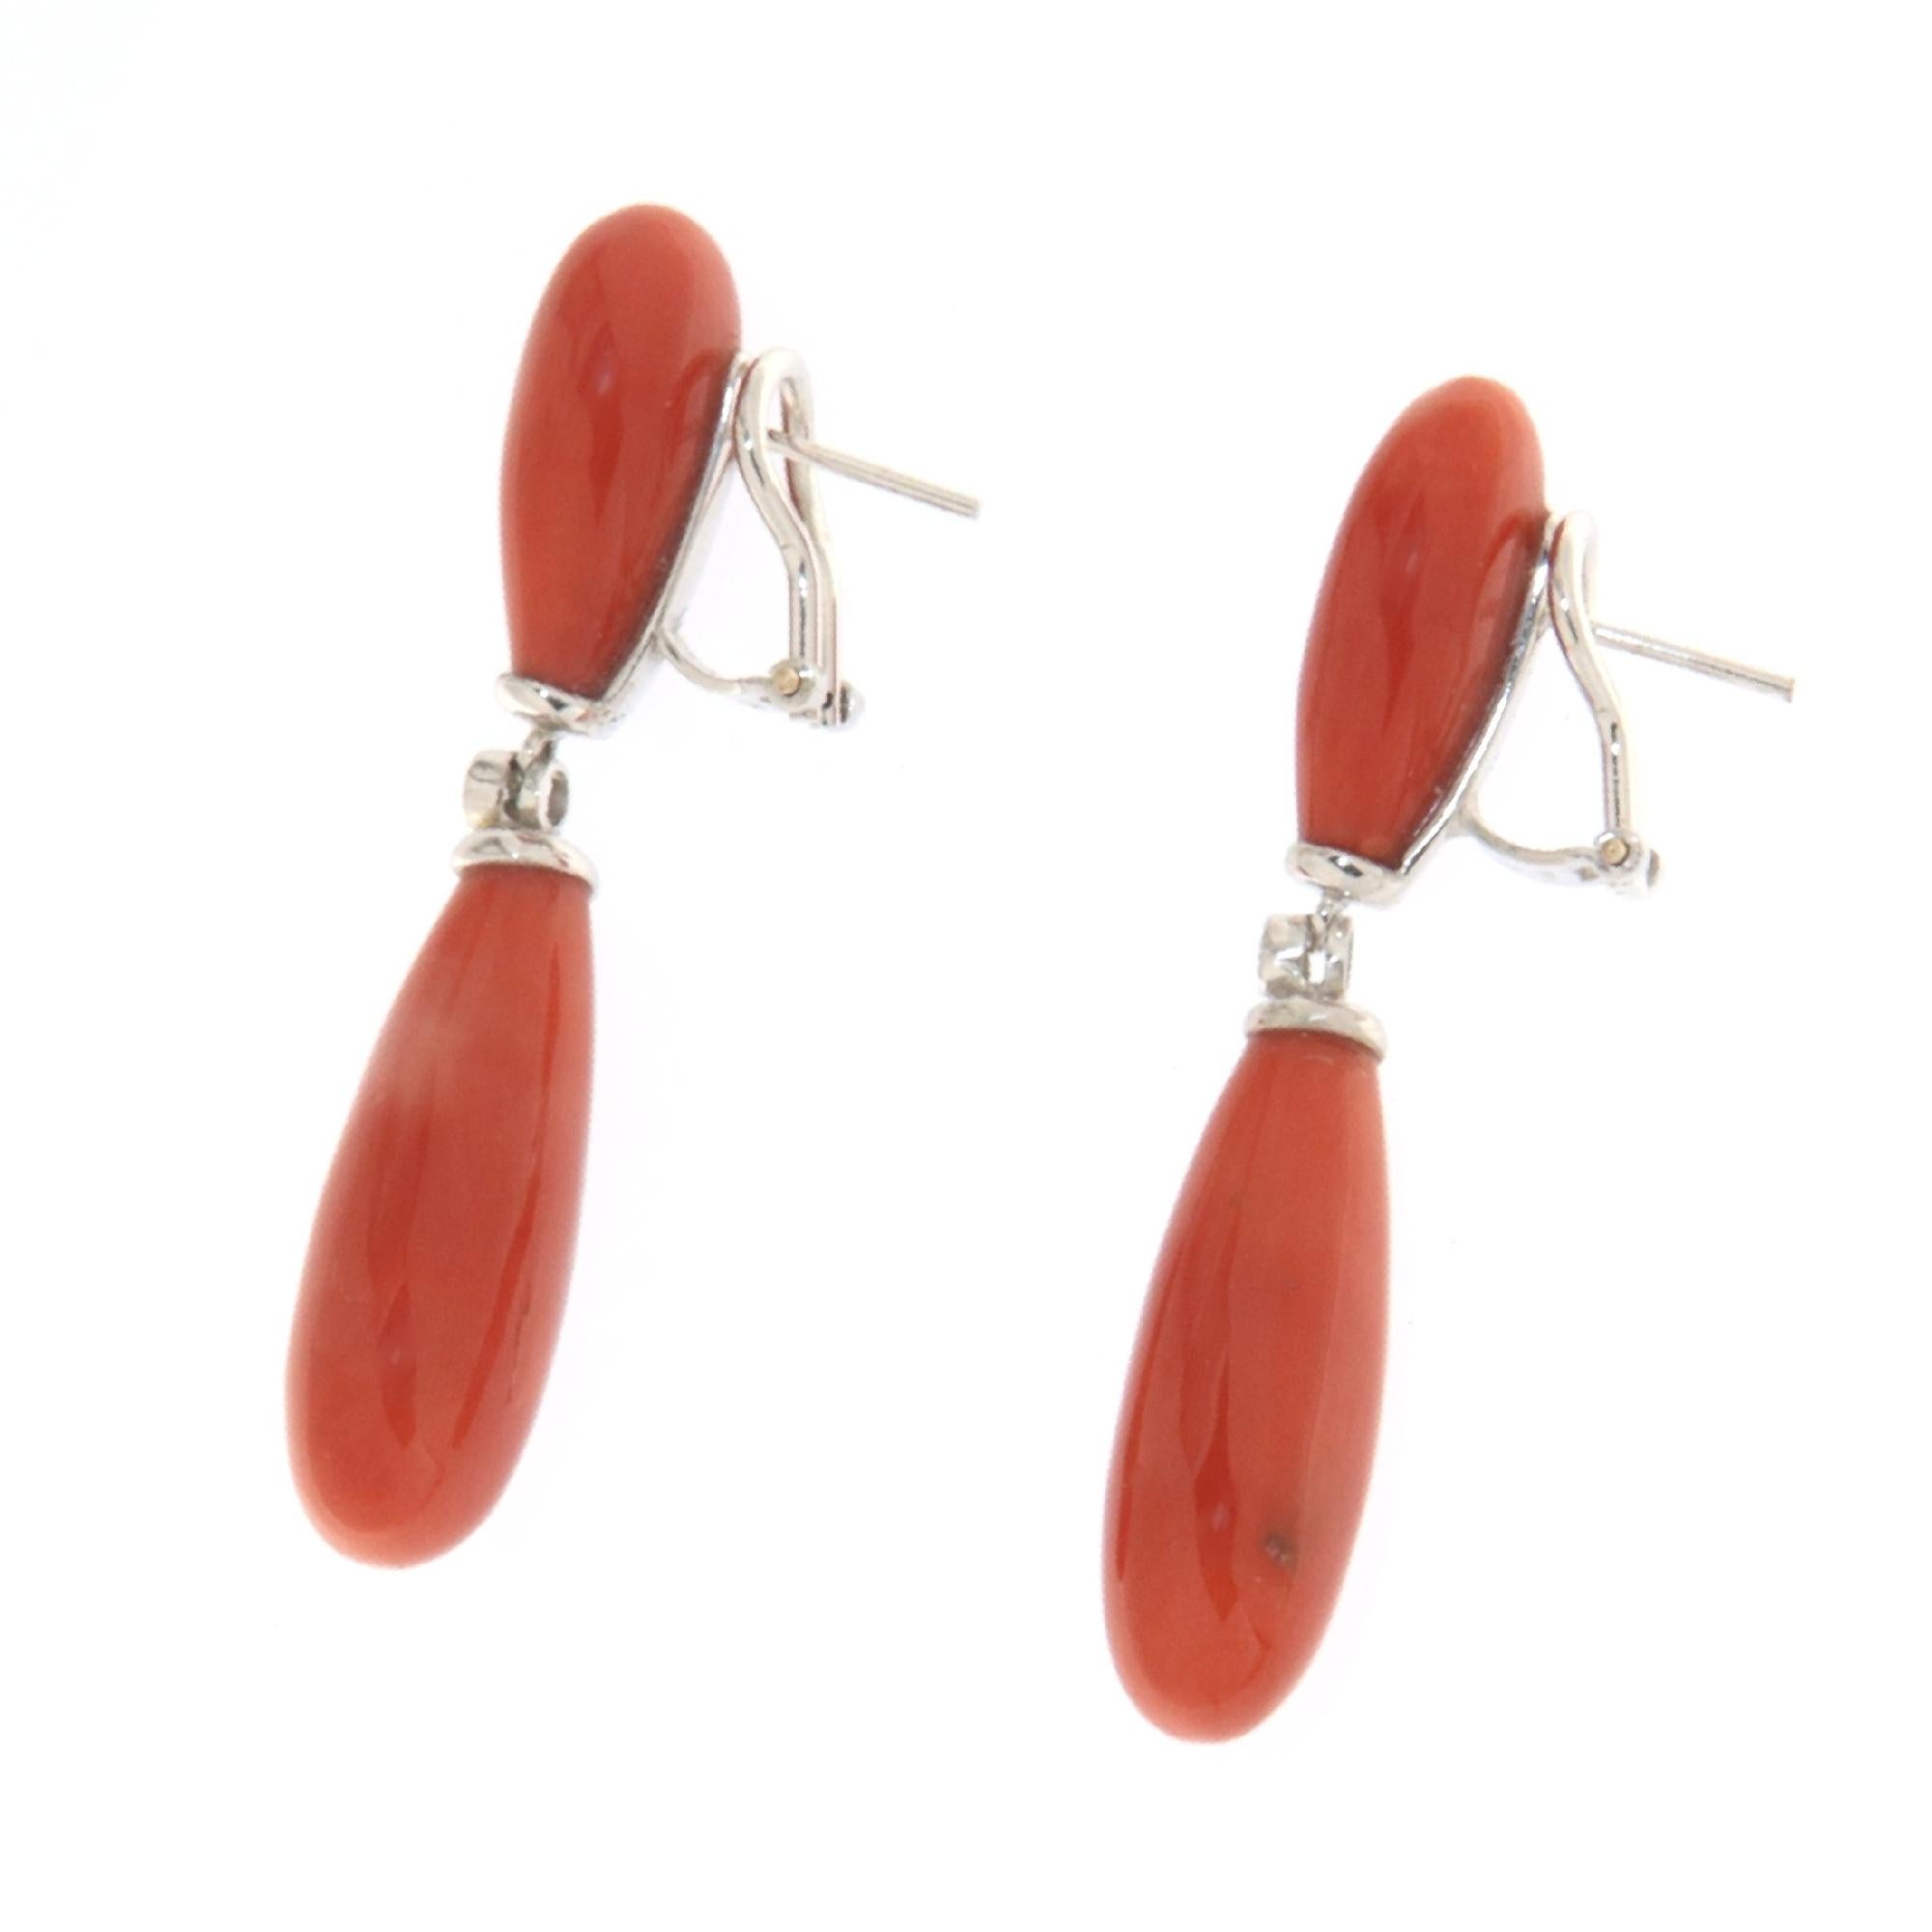 These elegant drop earrings in 18-karat white gold celebrate the mastery of Italian craftsmanship, representing a perfect symbiosis between modernity and tradition. The elongated shapes of the natural Sardinian coral, renowned for its deep red color